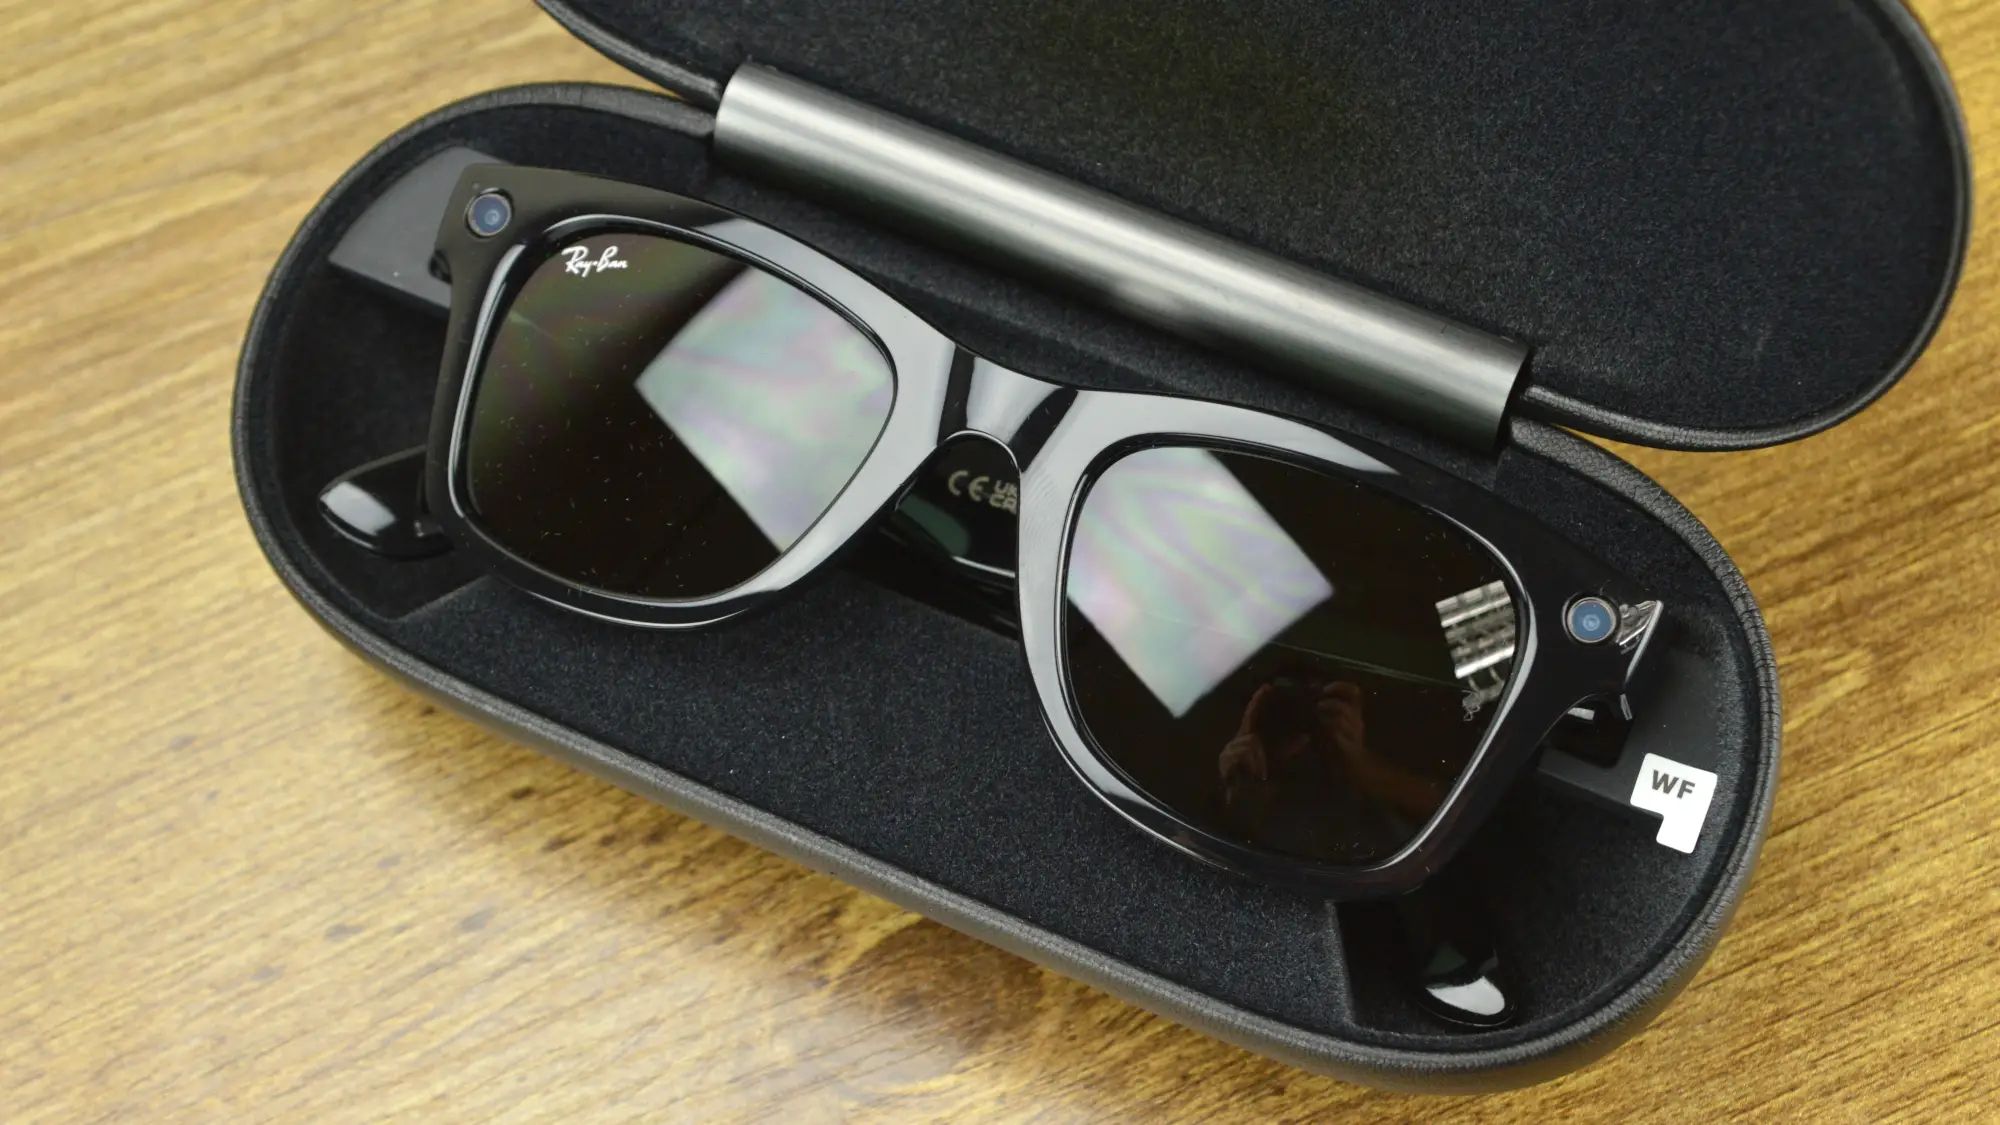 How To Charge Ray Ban Smart Glasses | Robots.net